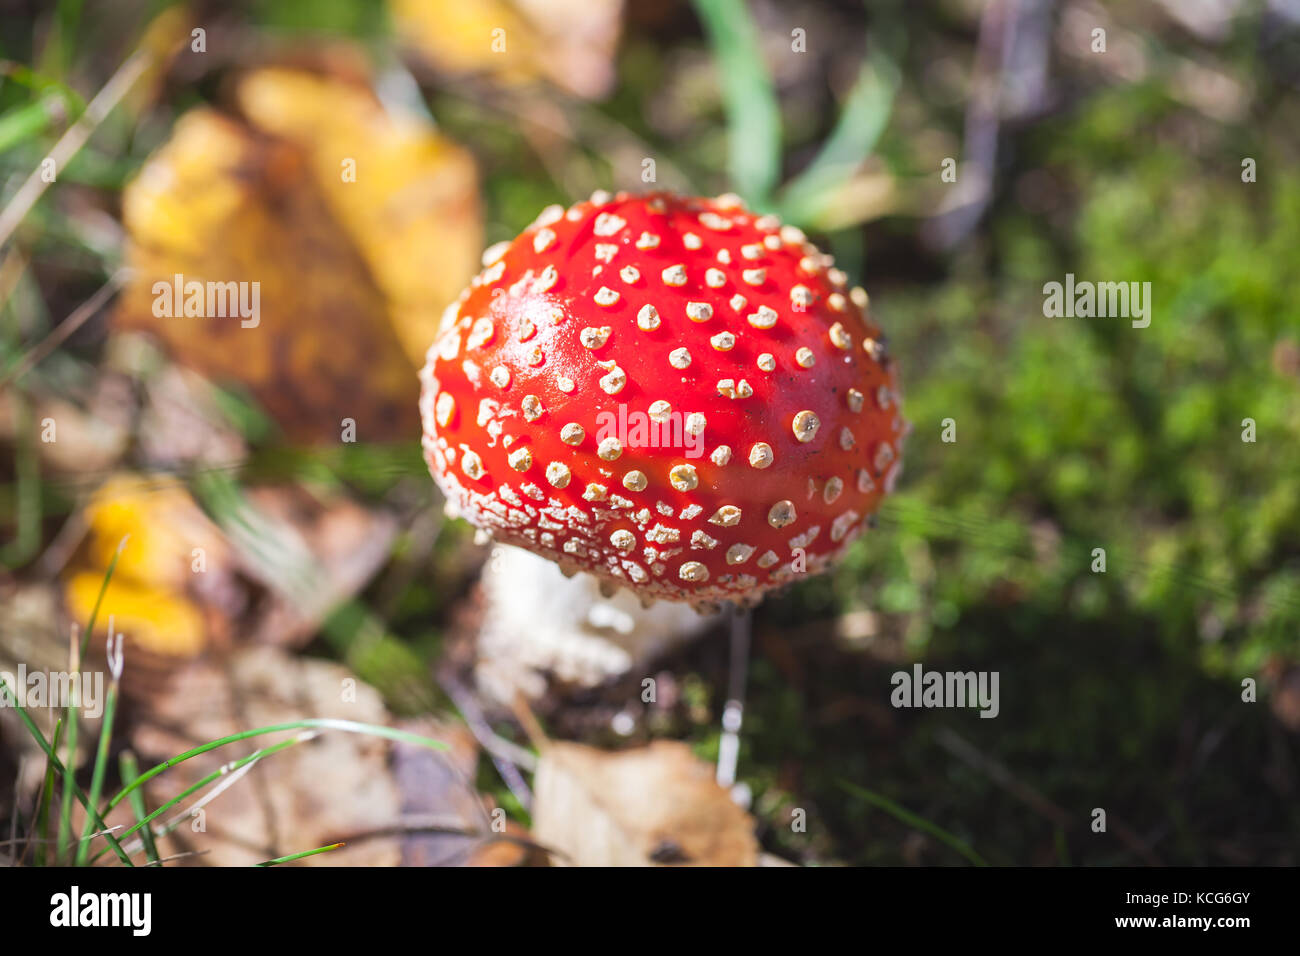 Poisonous mushroom Amanita muscaria, commonly known as the fly agaric or fly amanita grows in summer European forest Stock Photo